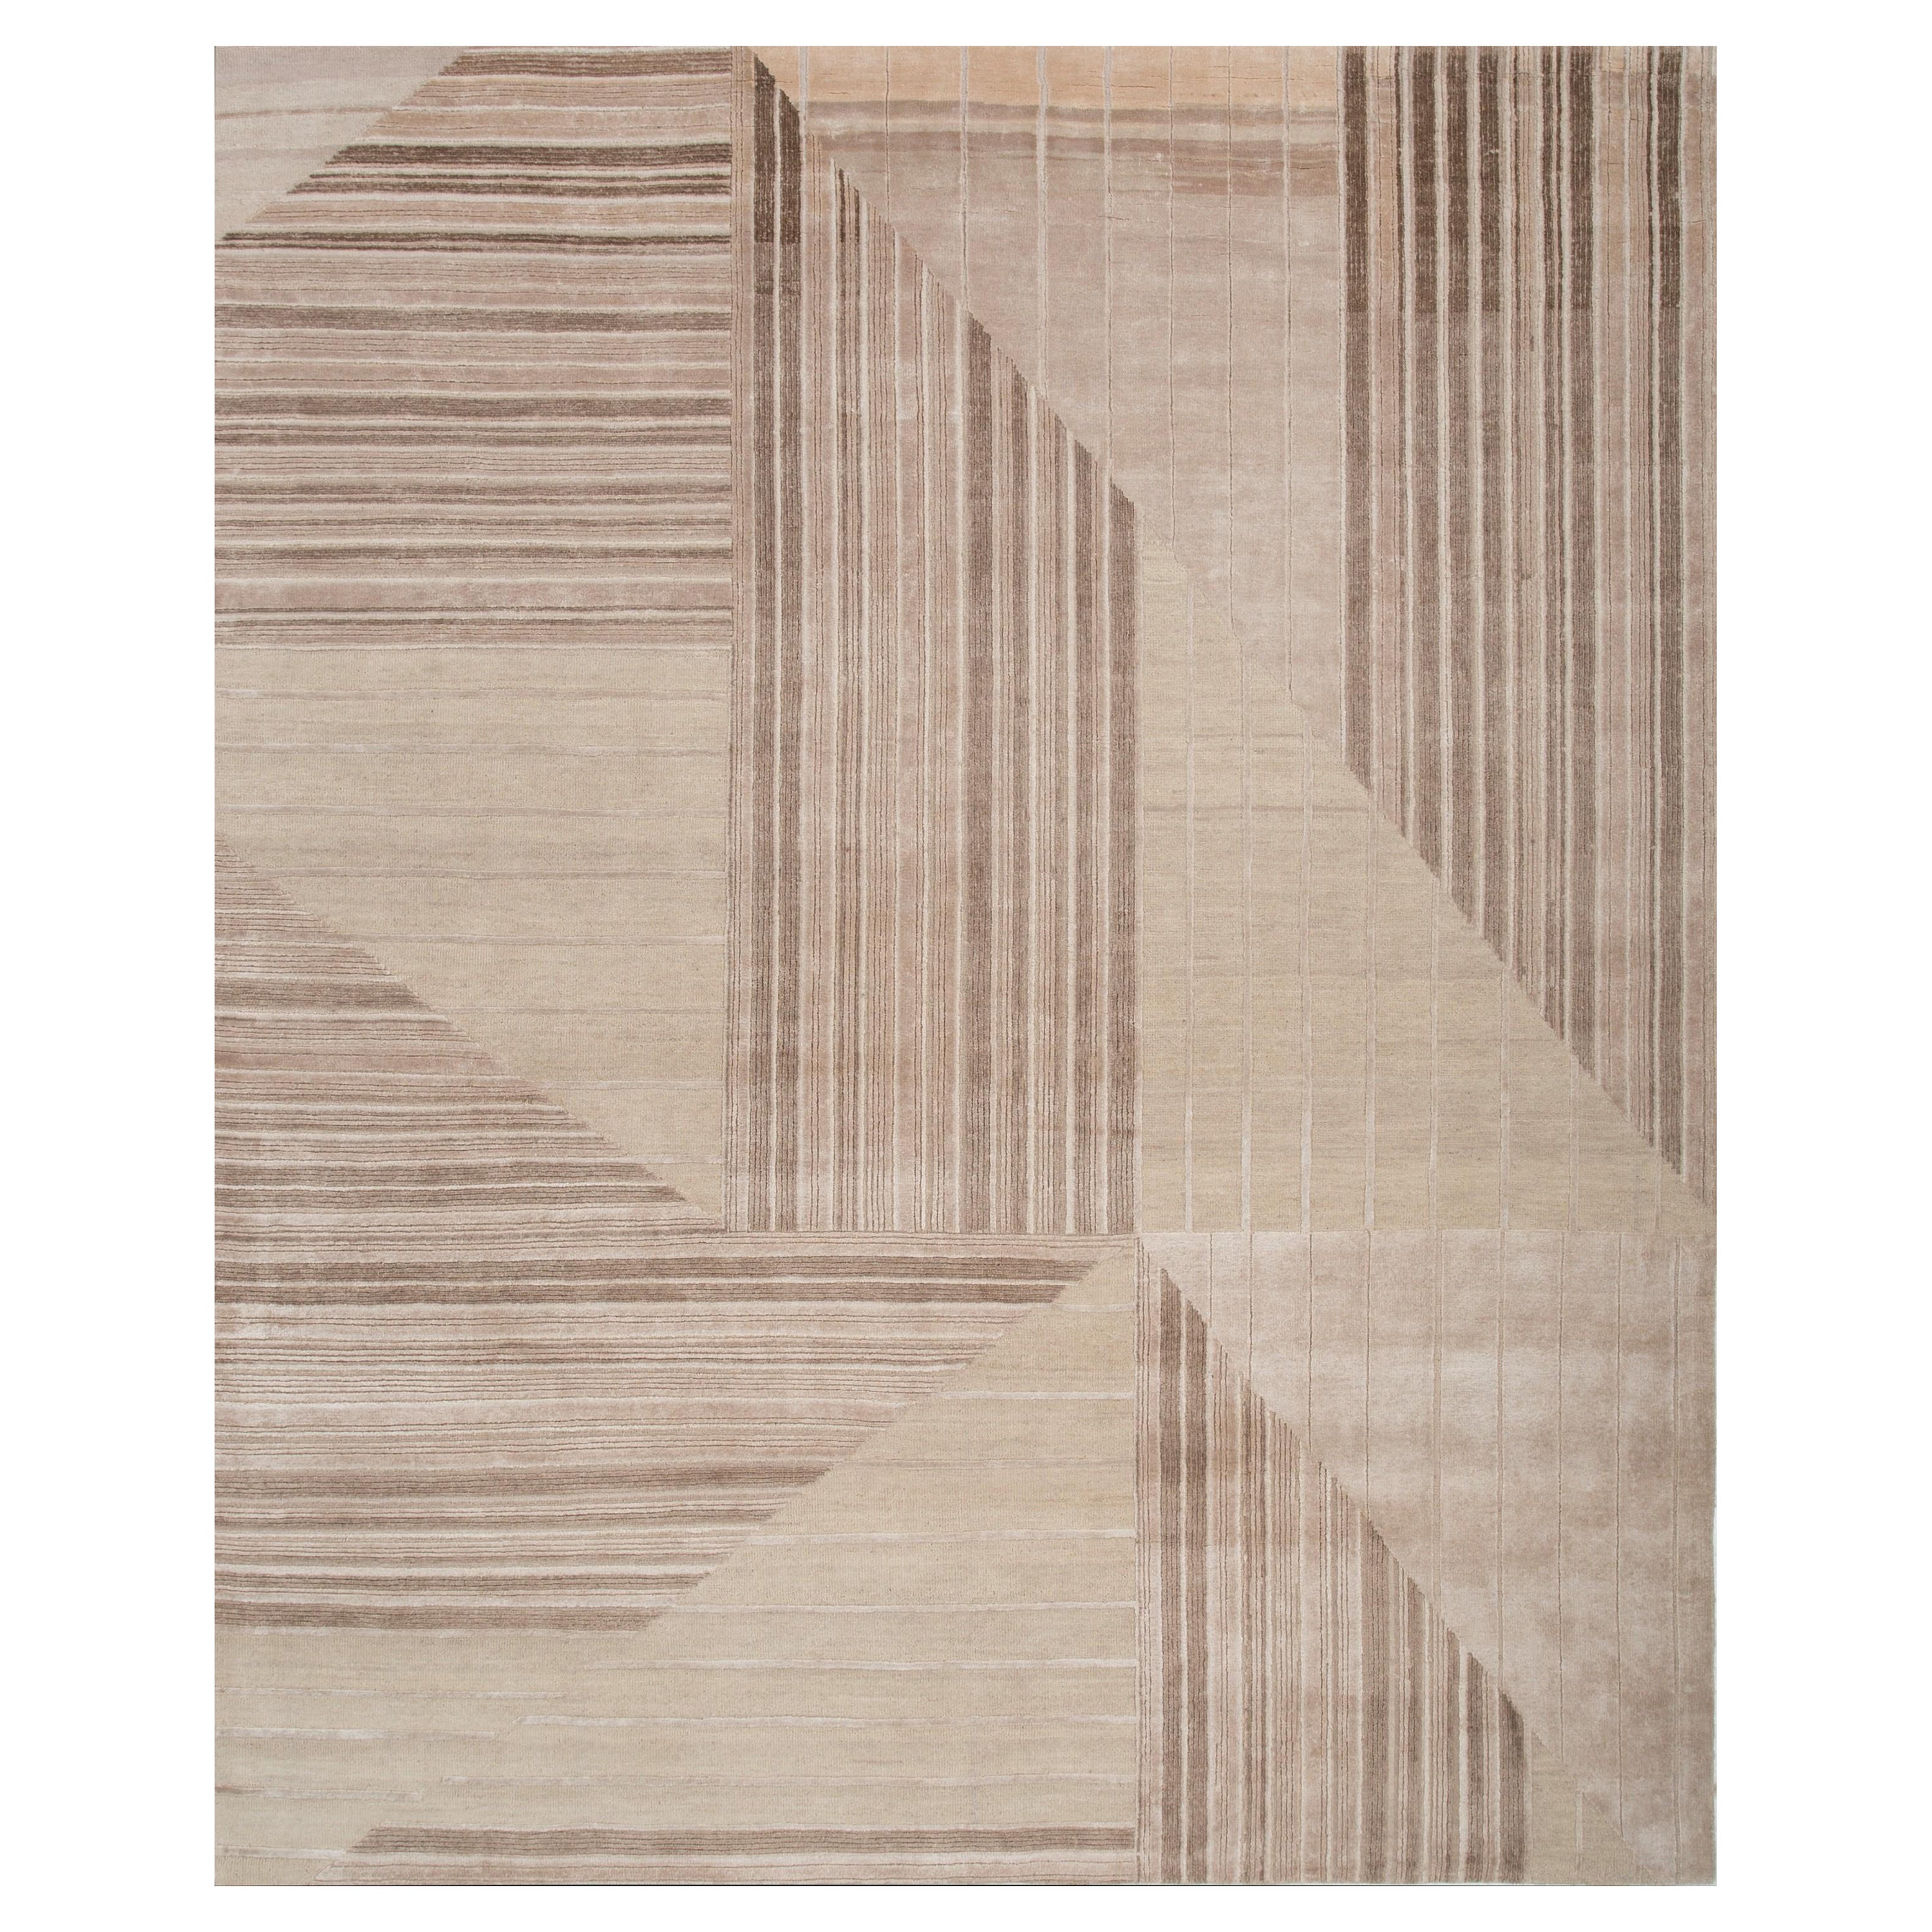 Muted Splendor Antique White & light Coffee 240x300 Cm Handknotted Rug For Sale